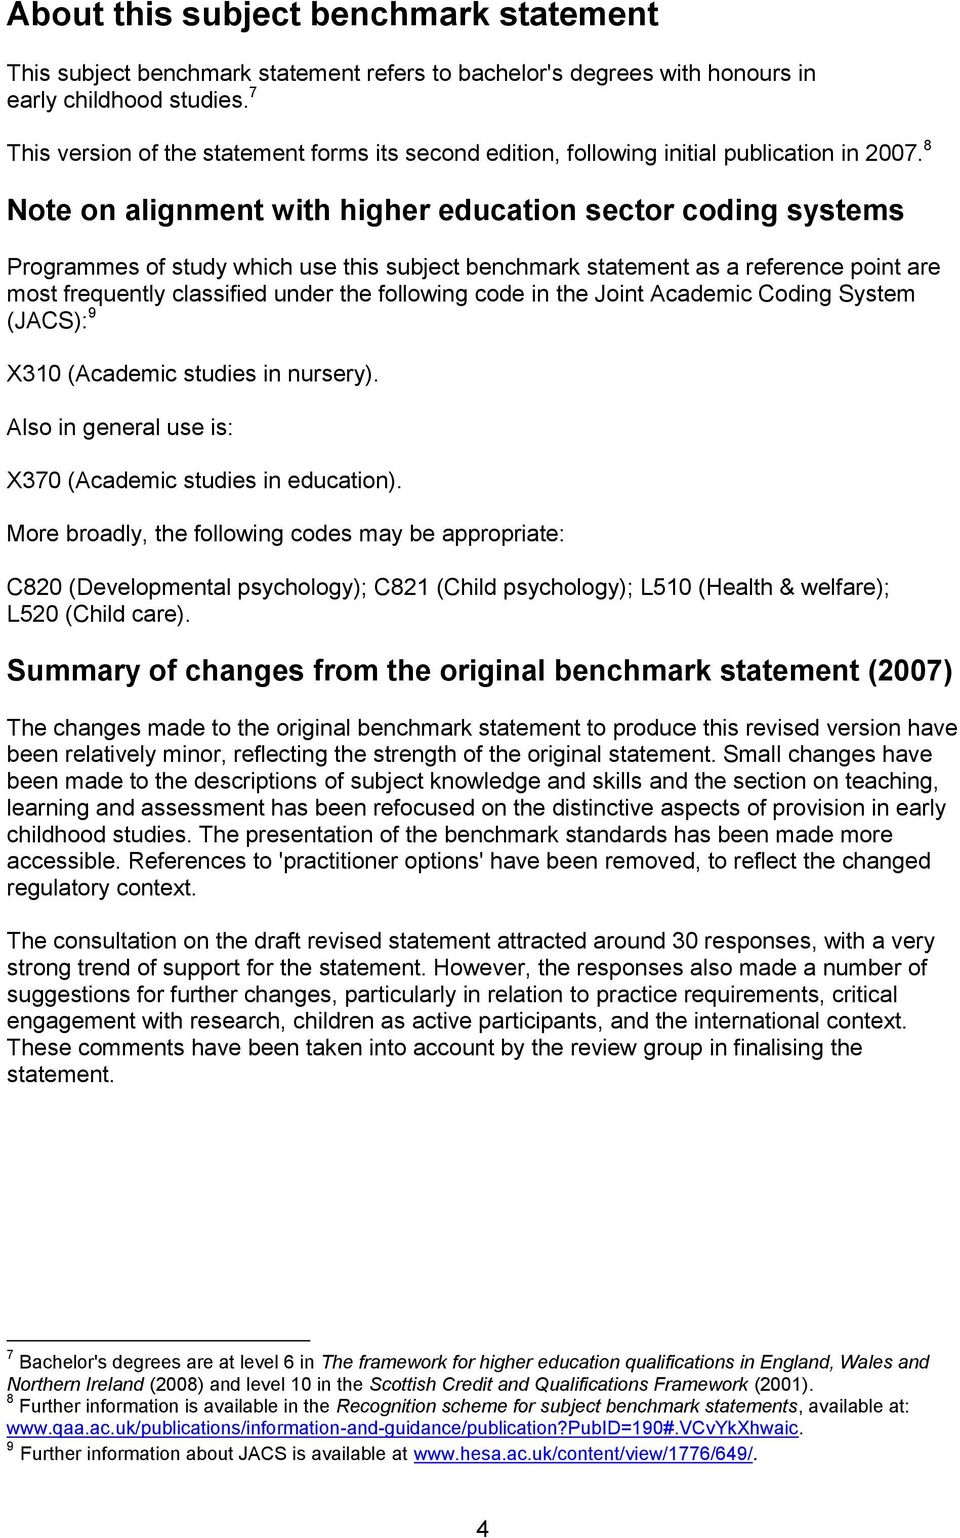 8 Note on alignment with higher education sector coding systems Programmes of study which use this subject benchmark statement as a reference point are most frequently classified under the following